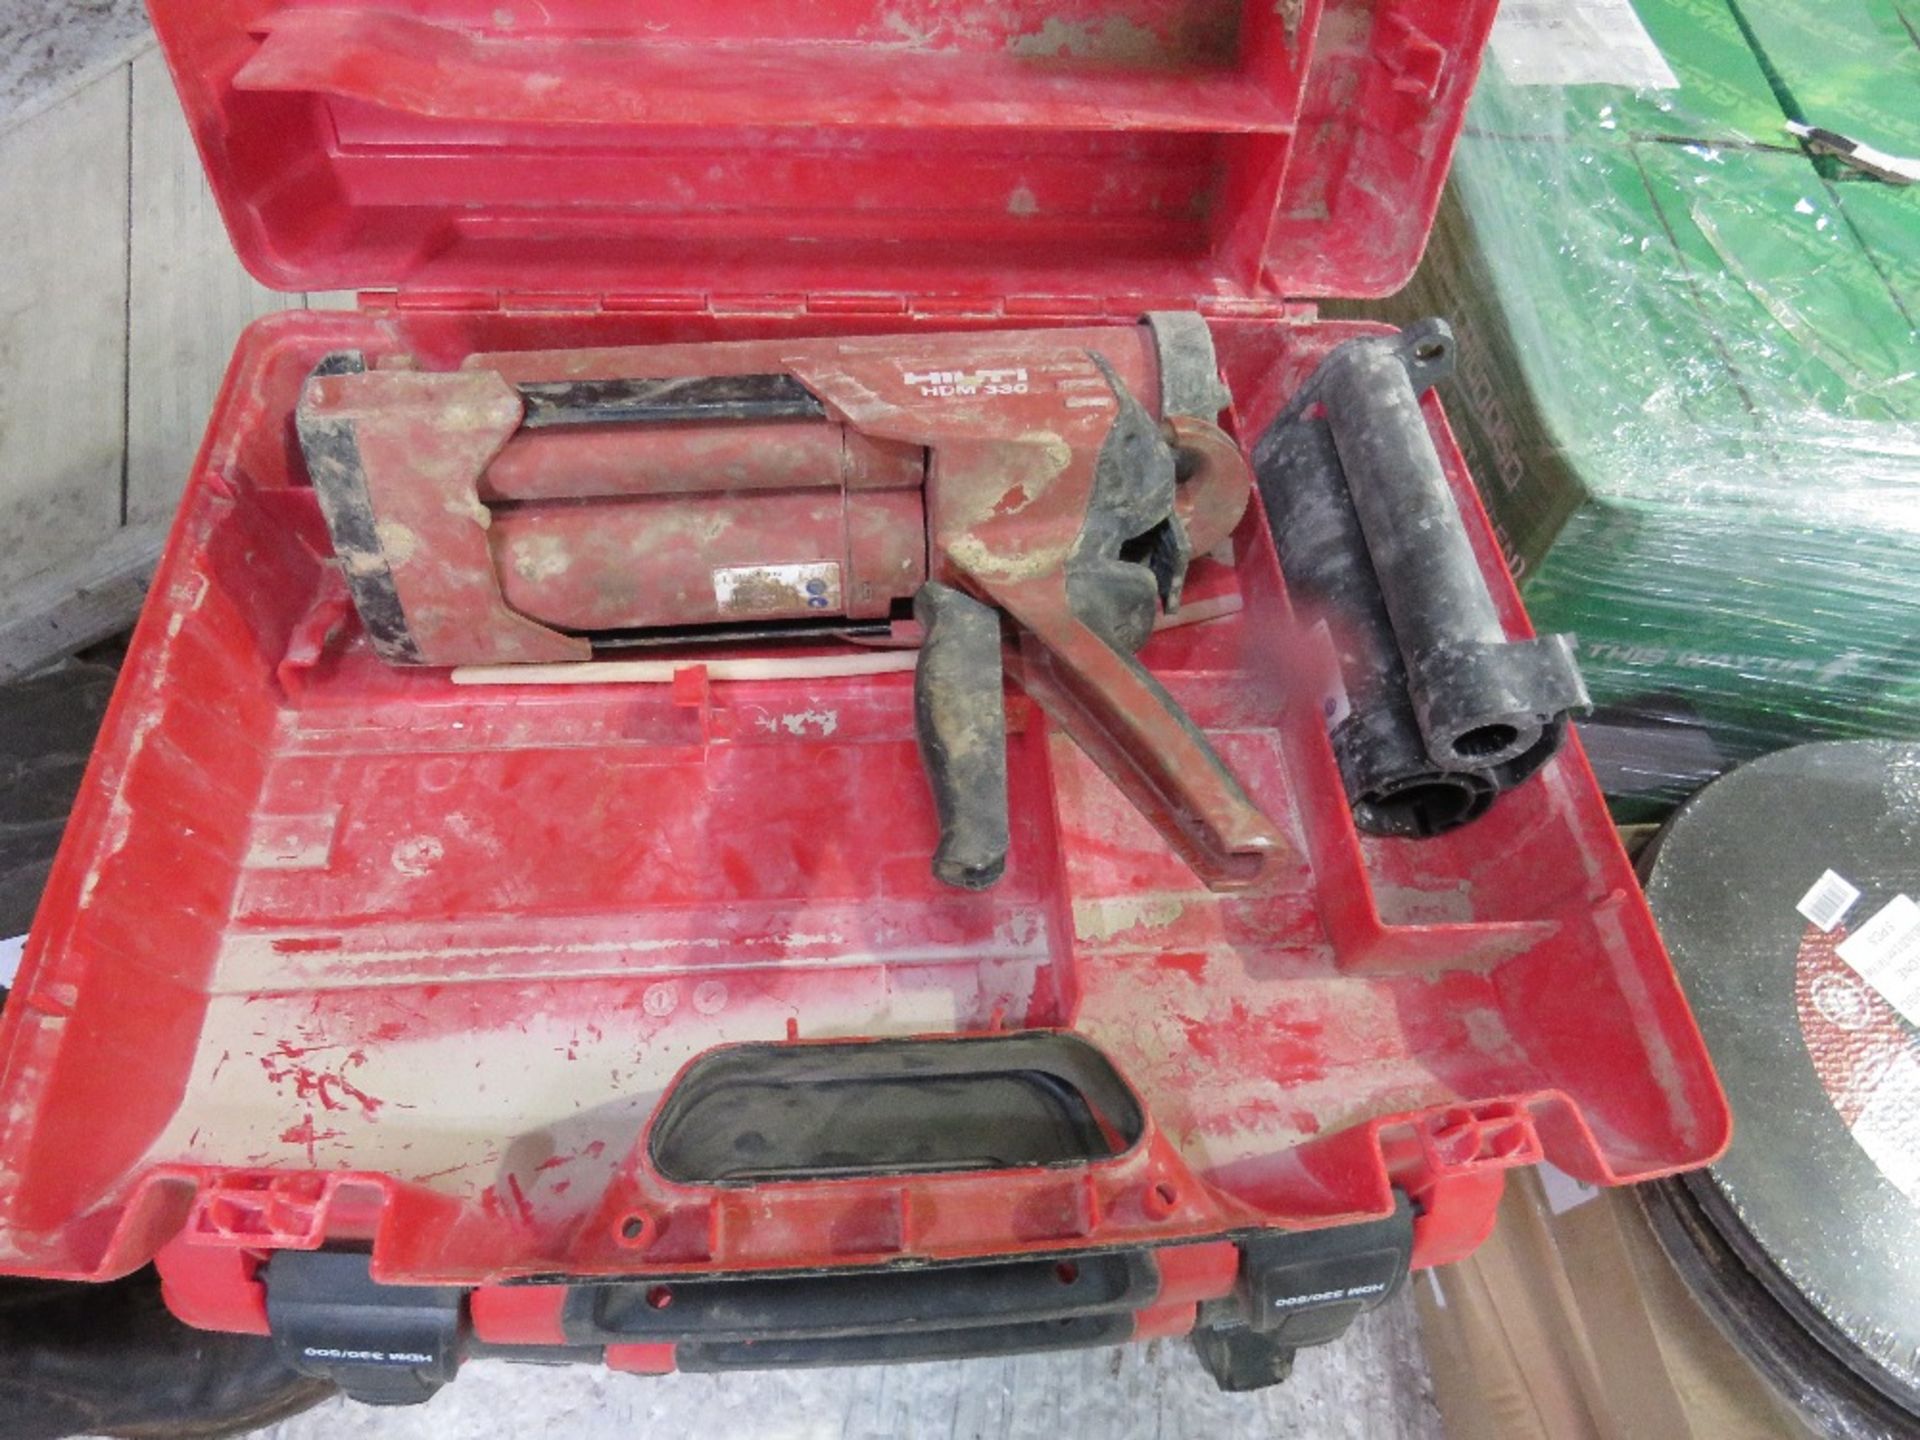 4 X HILTI HDM 330/500 MASTIC SEALANT GUNS. SOURCED FROM COMPANY LIQUIDATION. THIS LOT IS SOLD U - Image 2 of 5